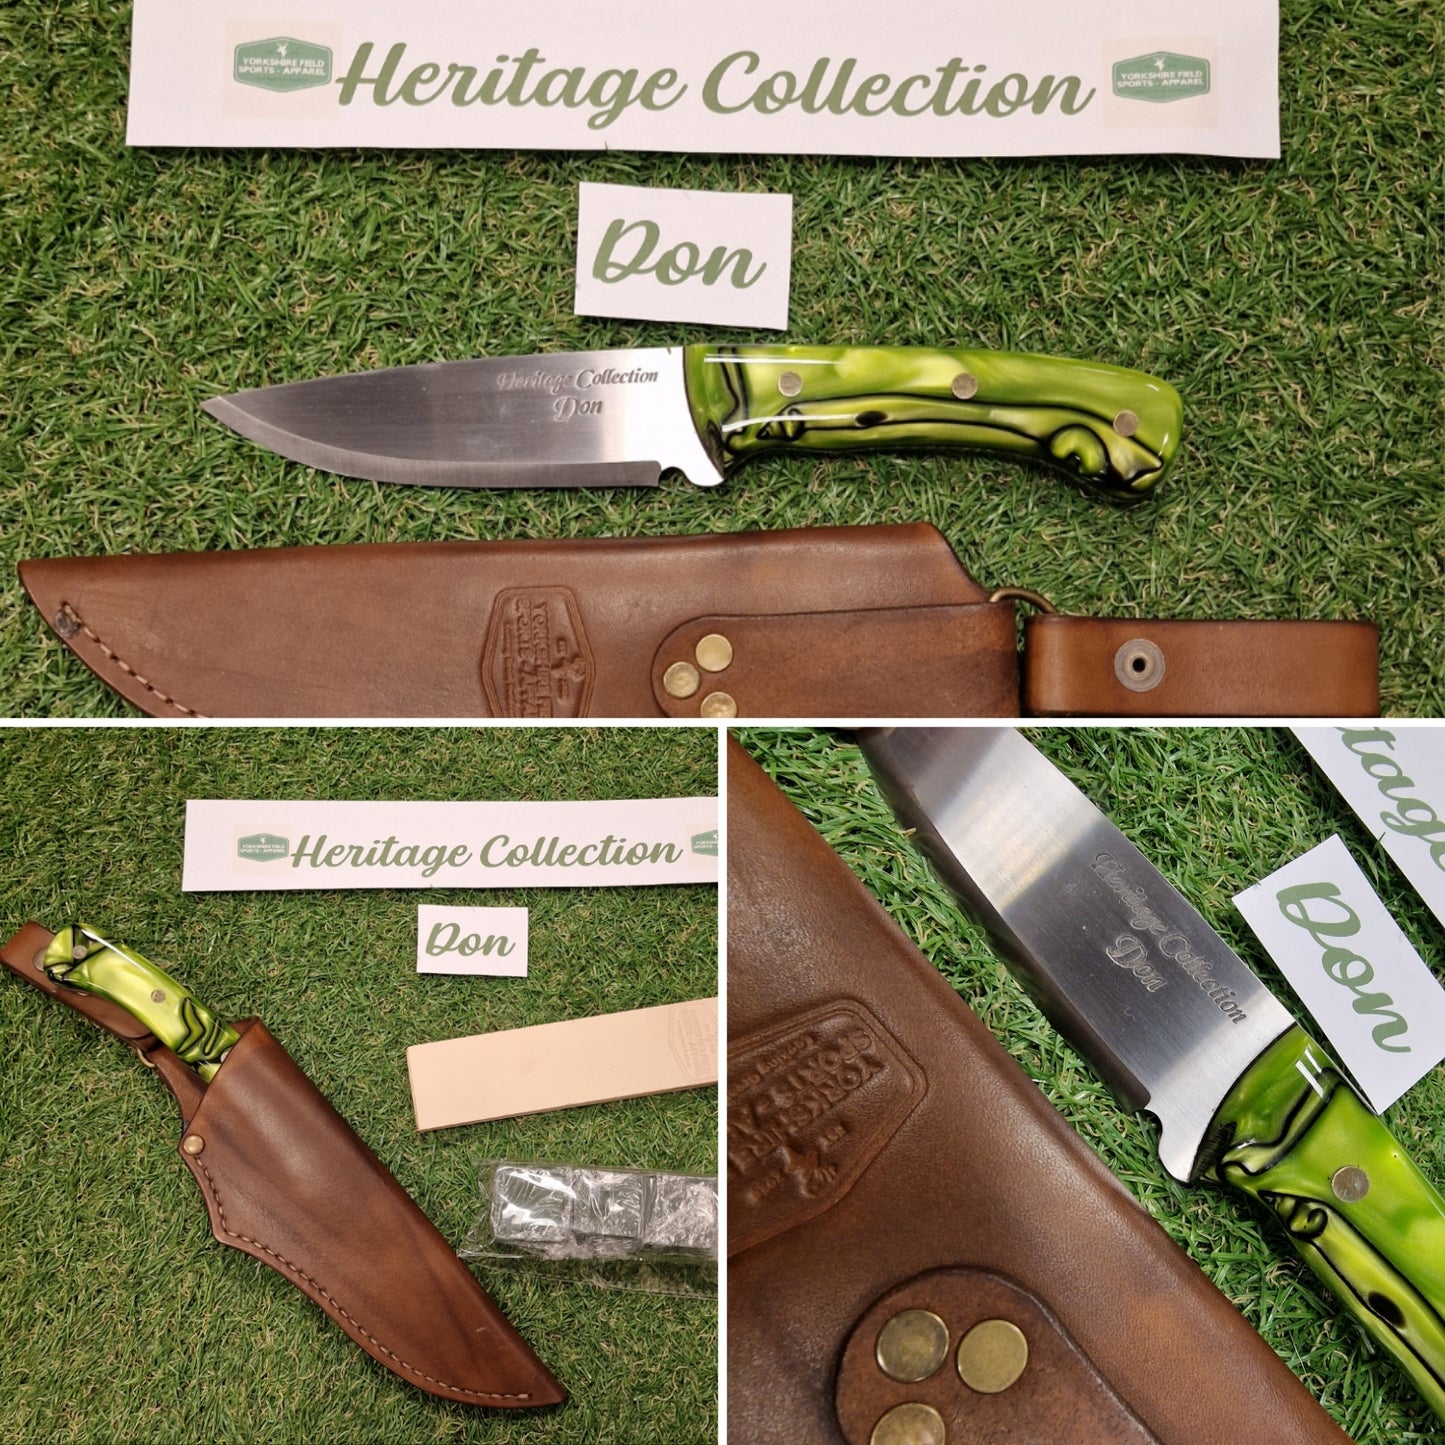 Yorkshire Field Sports-Apparel "Heritage collection" Don forged in Sheffield